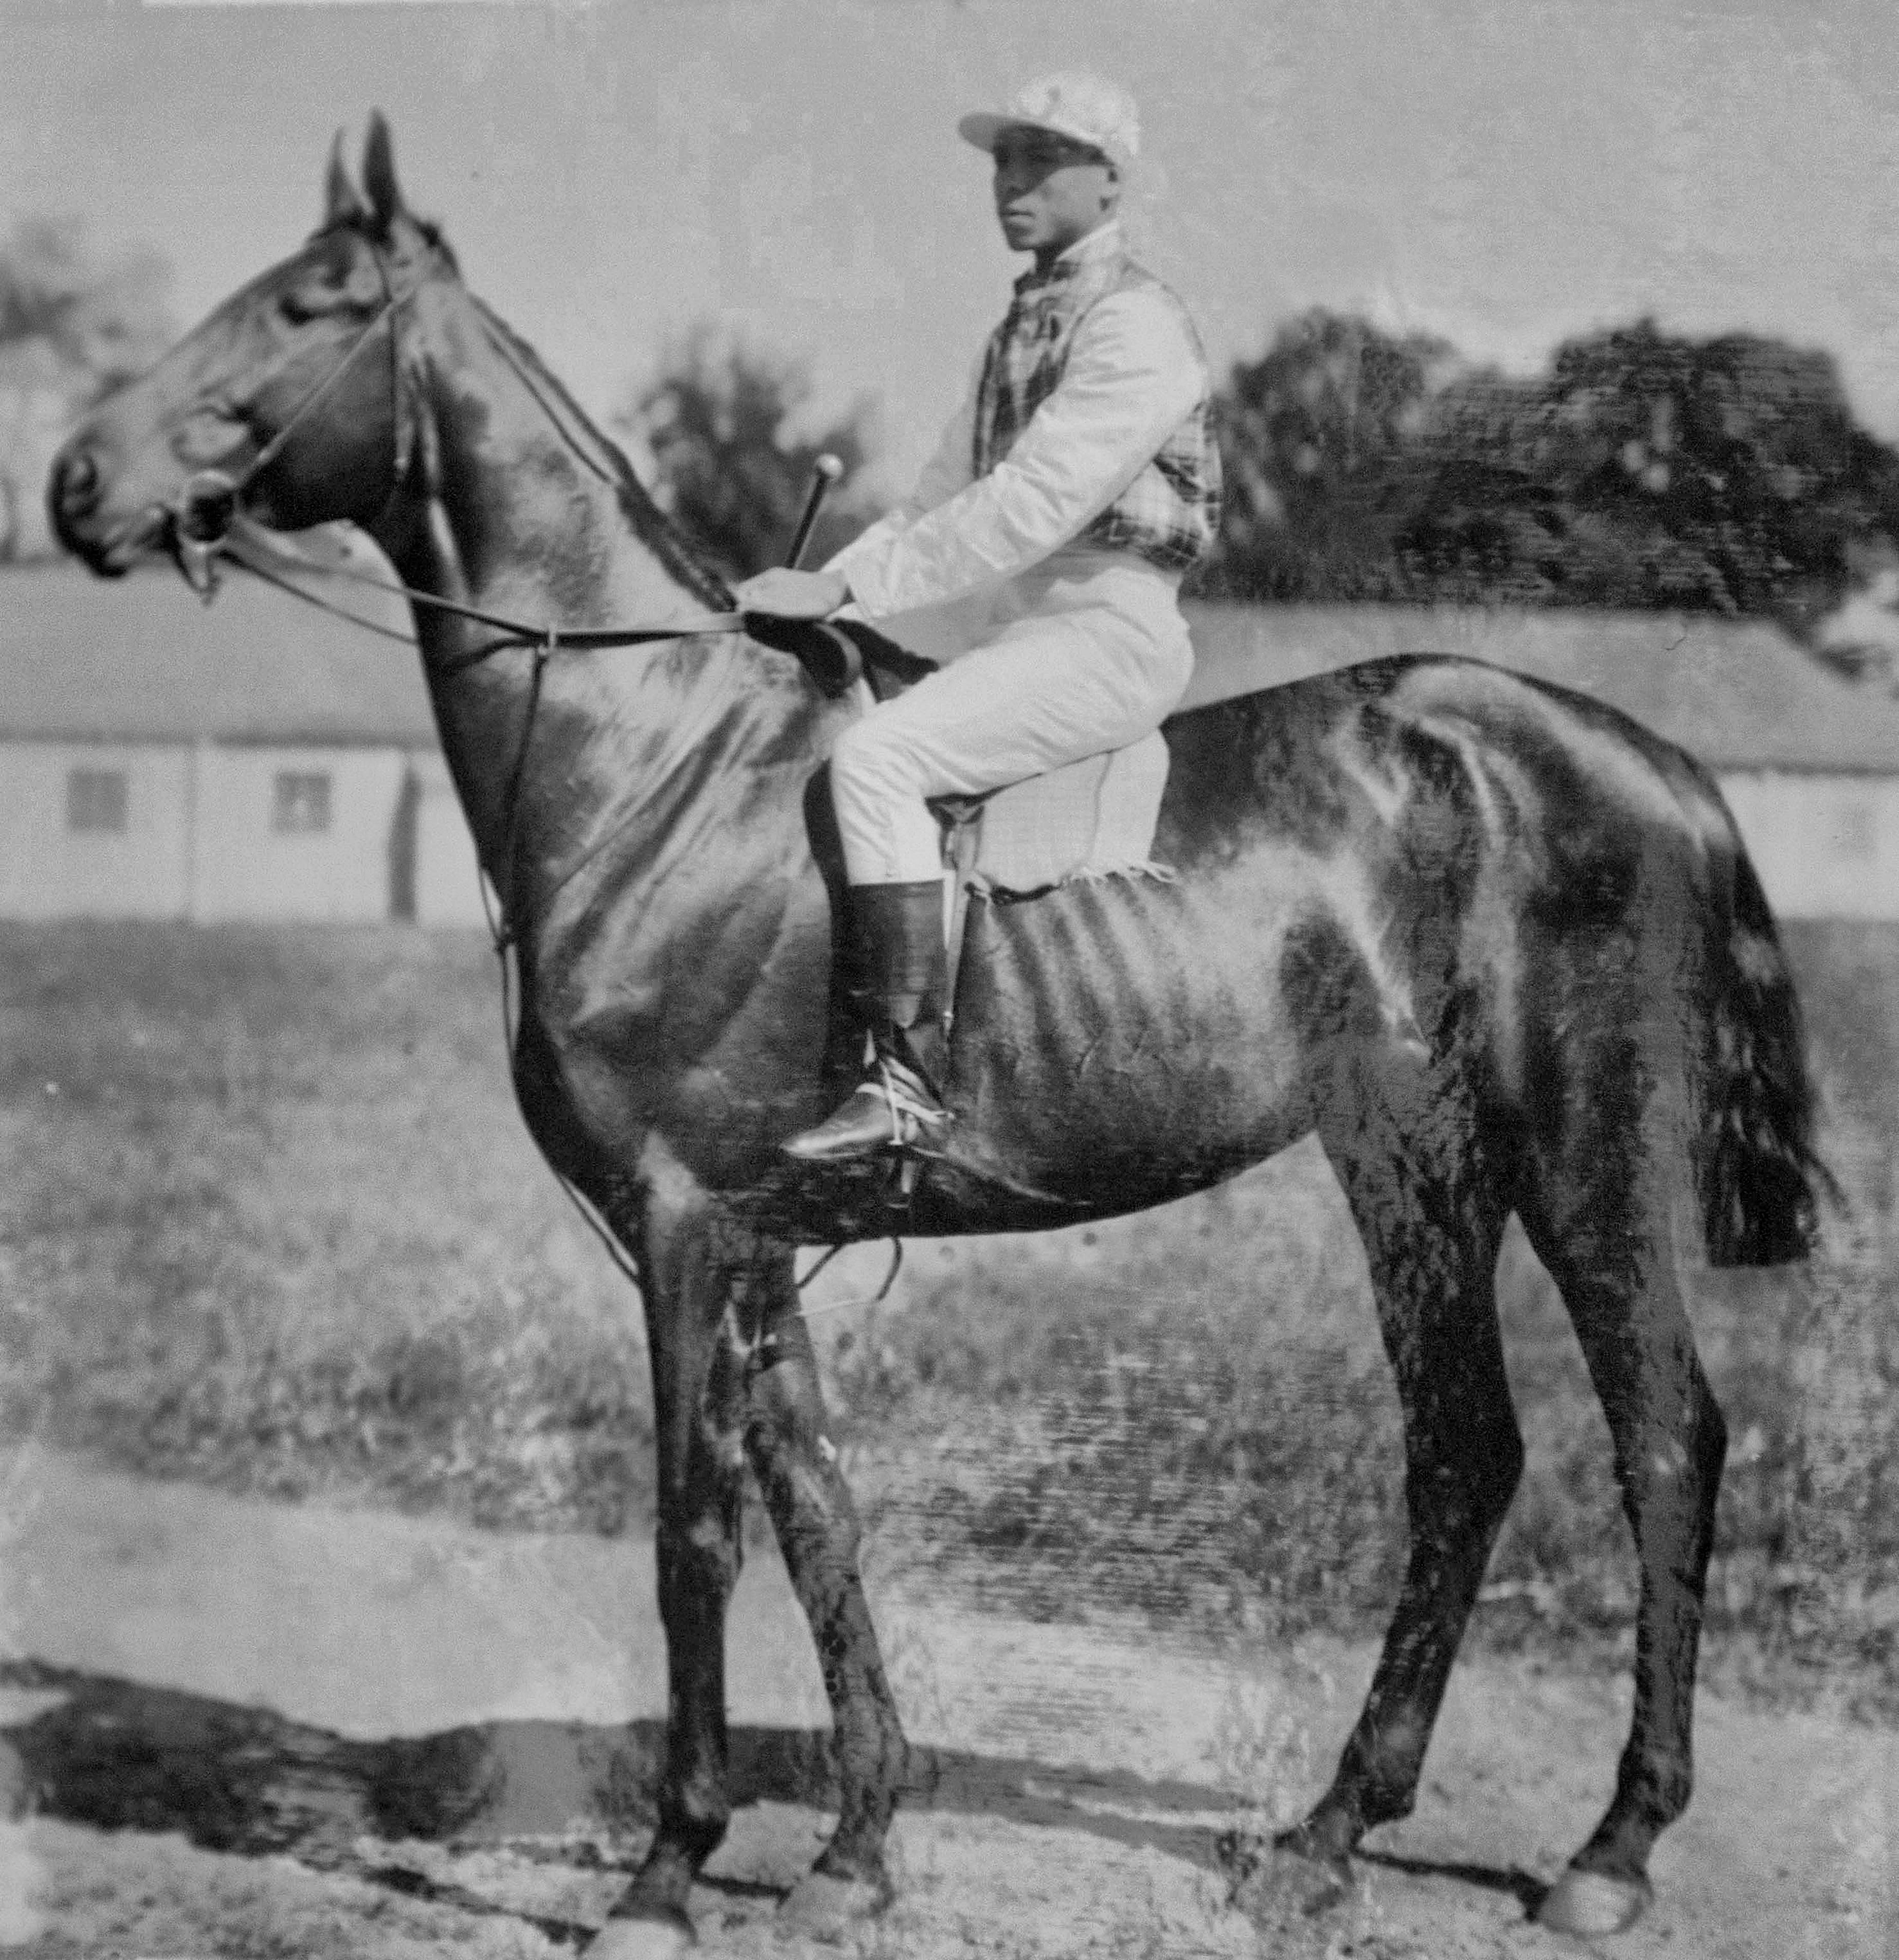 Clifford with Willie Simms up (Keeneland Library Hemment Collection)